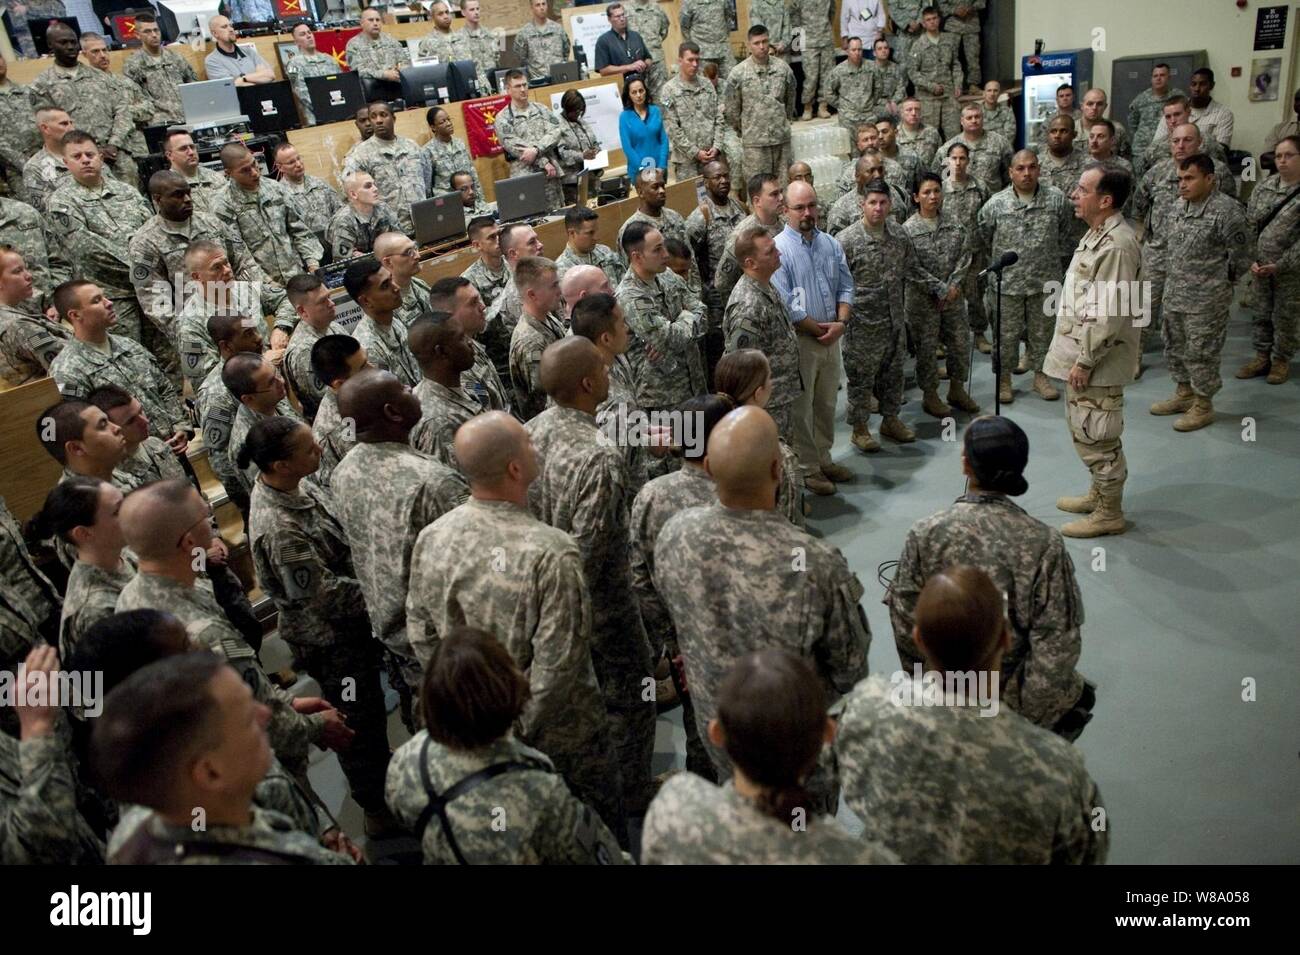 Chairman of the Joint Chiefs of Staff Adm. Mike Mullen conducts an all hands call with service members assigned to the 25th Infantry Division at the U.S. Division Center at Camp Liberty, Iraq, on April 22, 2011.  Mullen is in the Central Command area of operation supporting a USO tour to the region and talking to counterparts and service members stationed in the area. Stock Photo